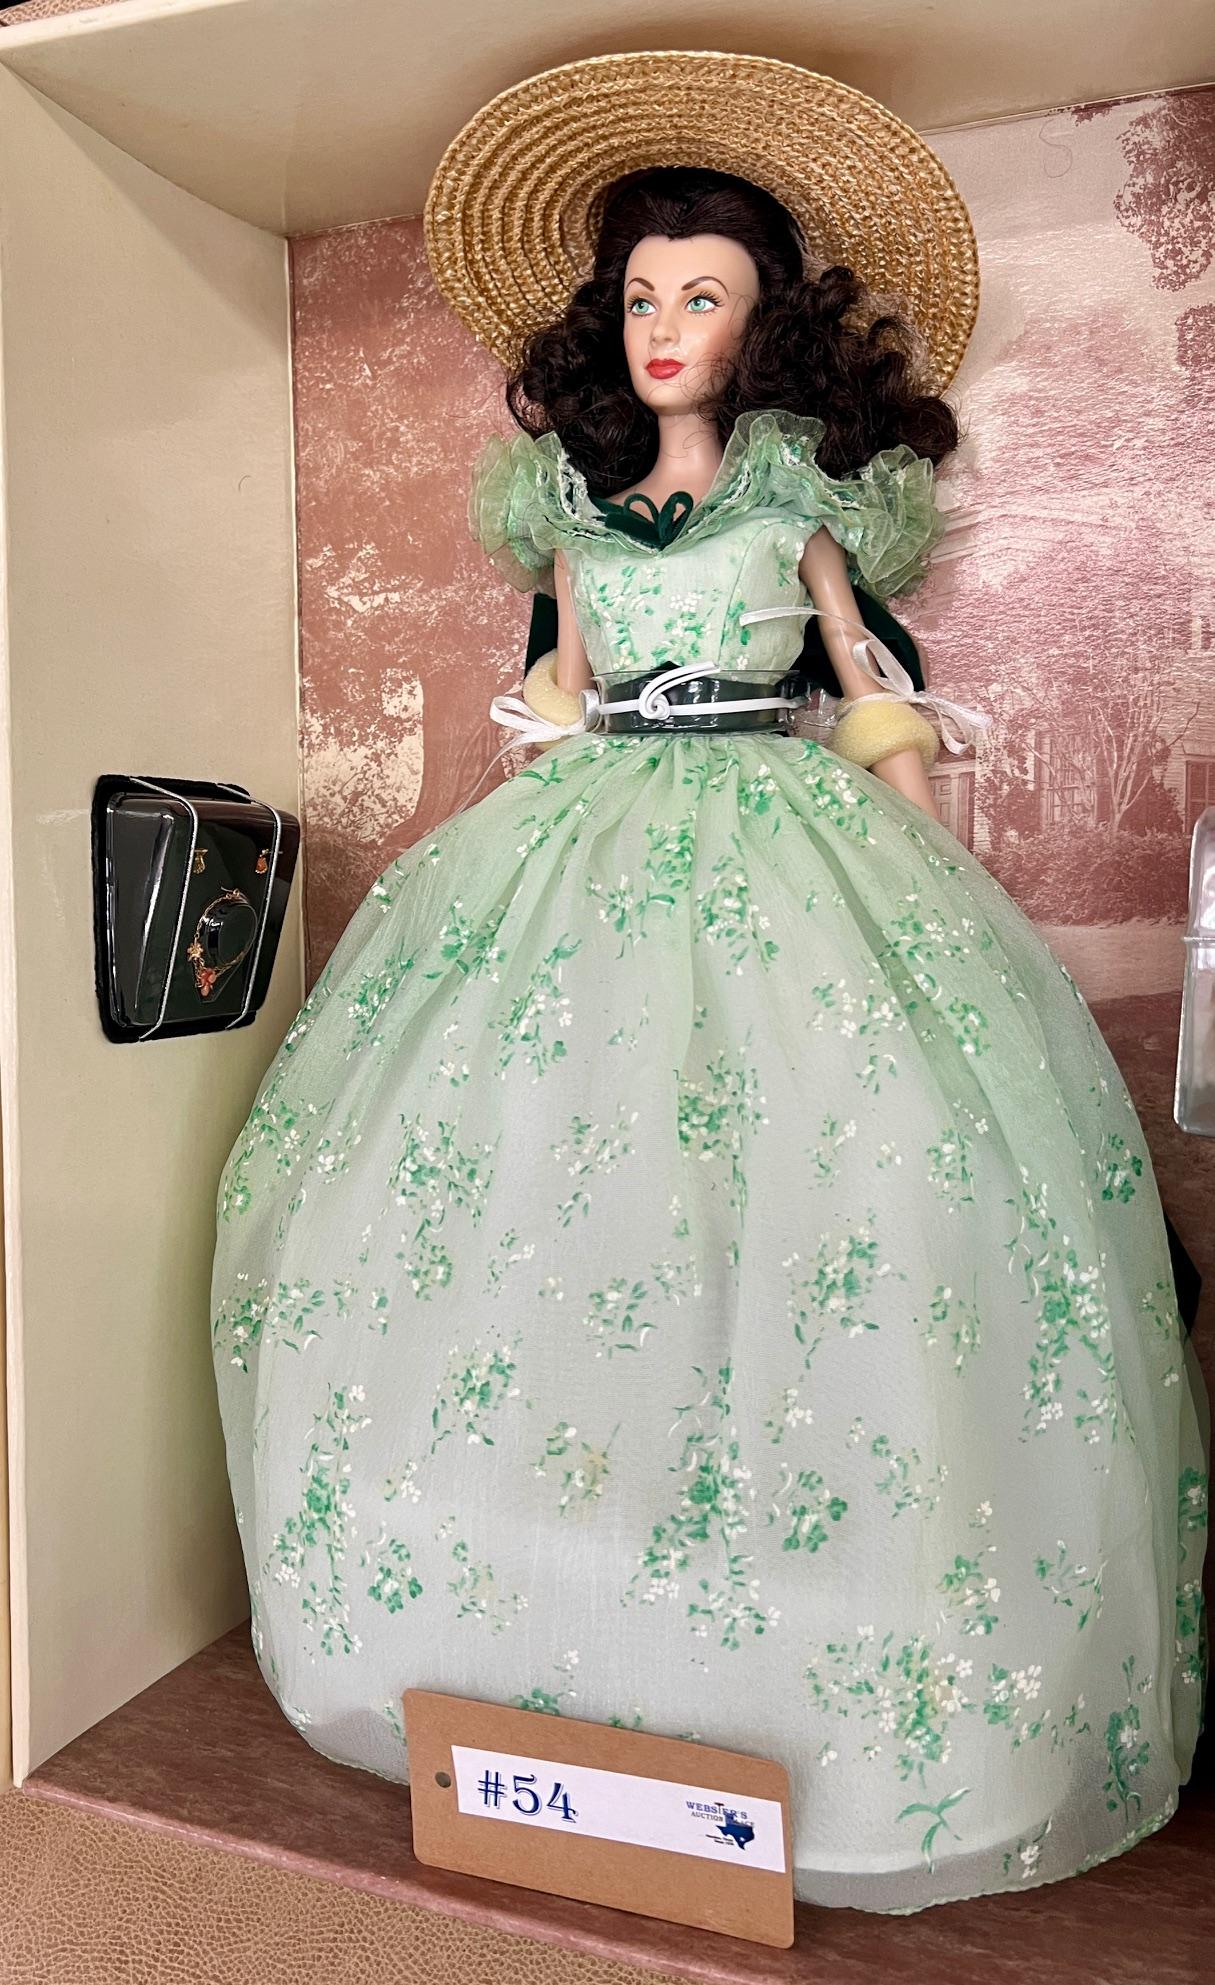 THE FRANKLIN MINT GONE WITH THE WIND"SCARLETT O'HARA" VINYL PORTRAIT DOLL